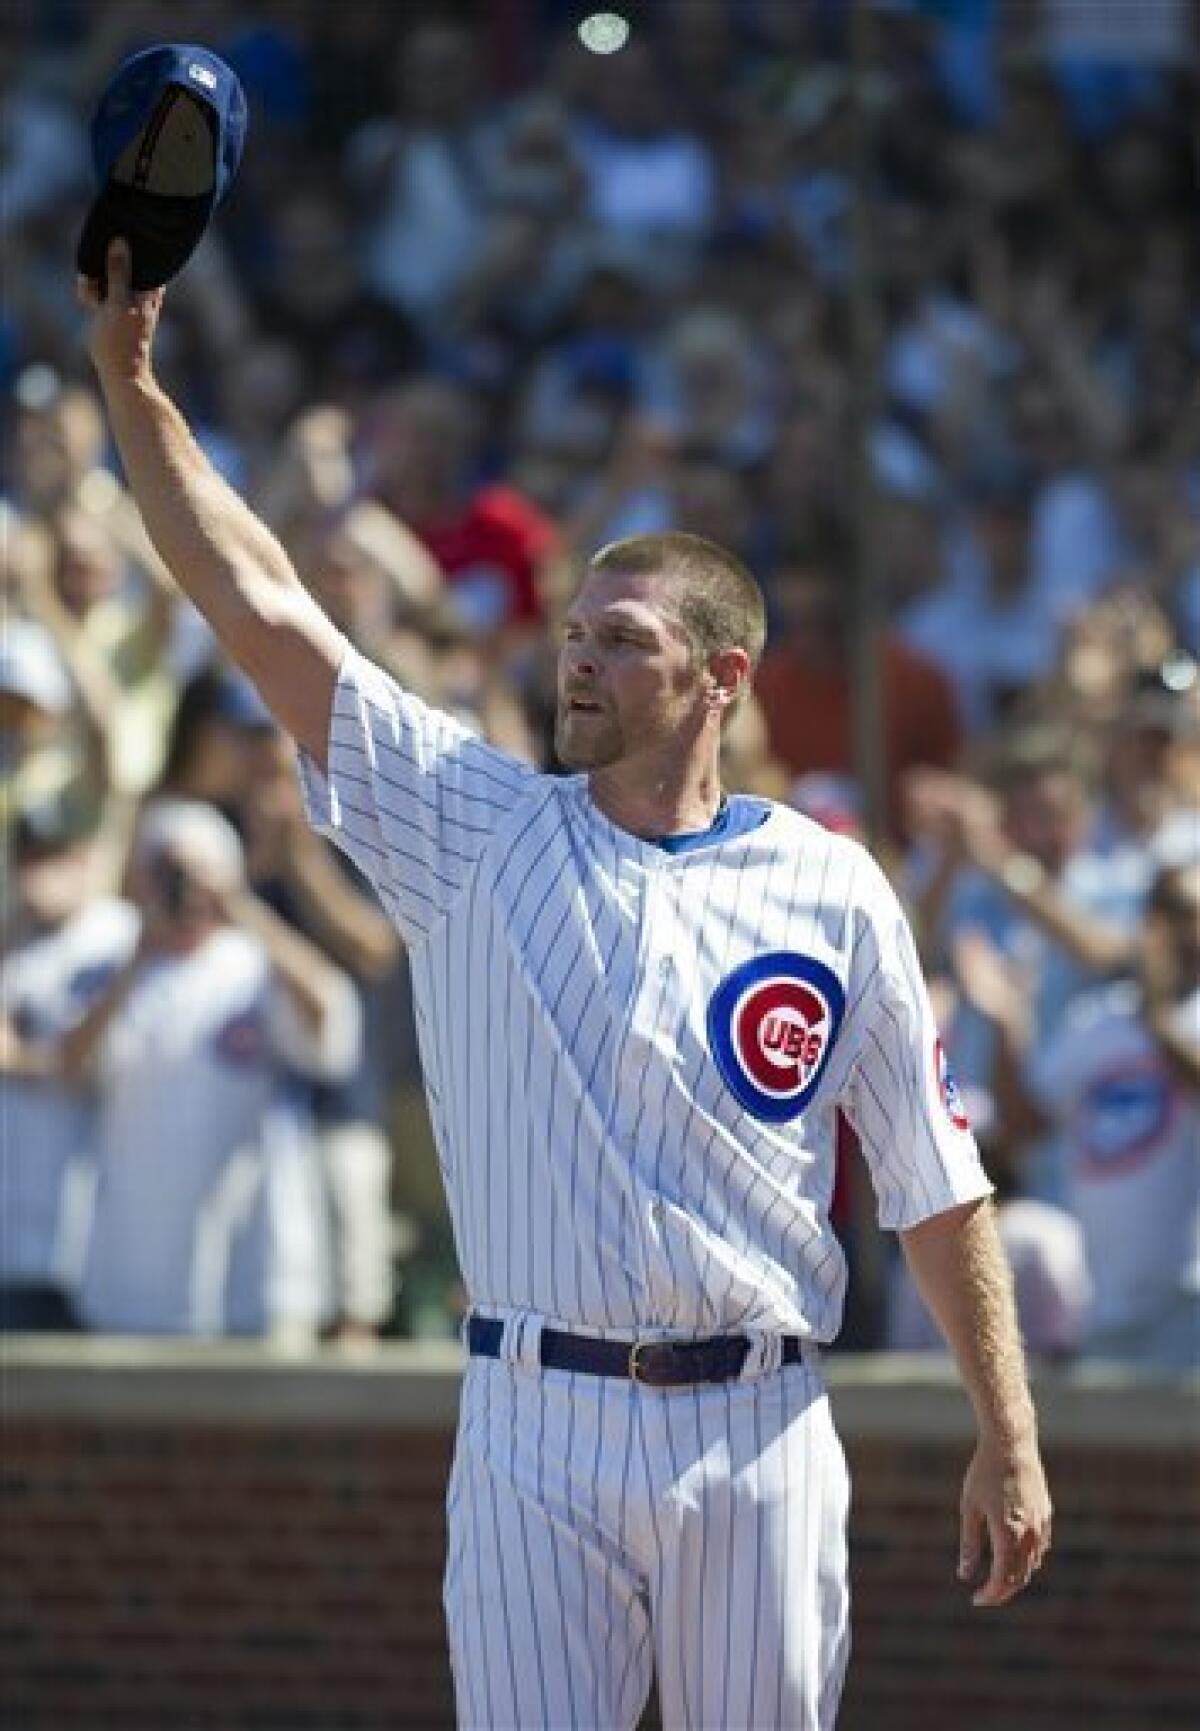 Kerry Wood, Astros recall 20-strikeout game